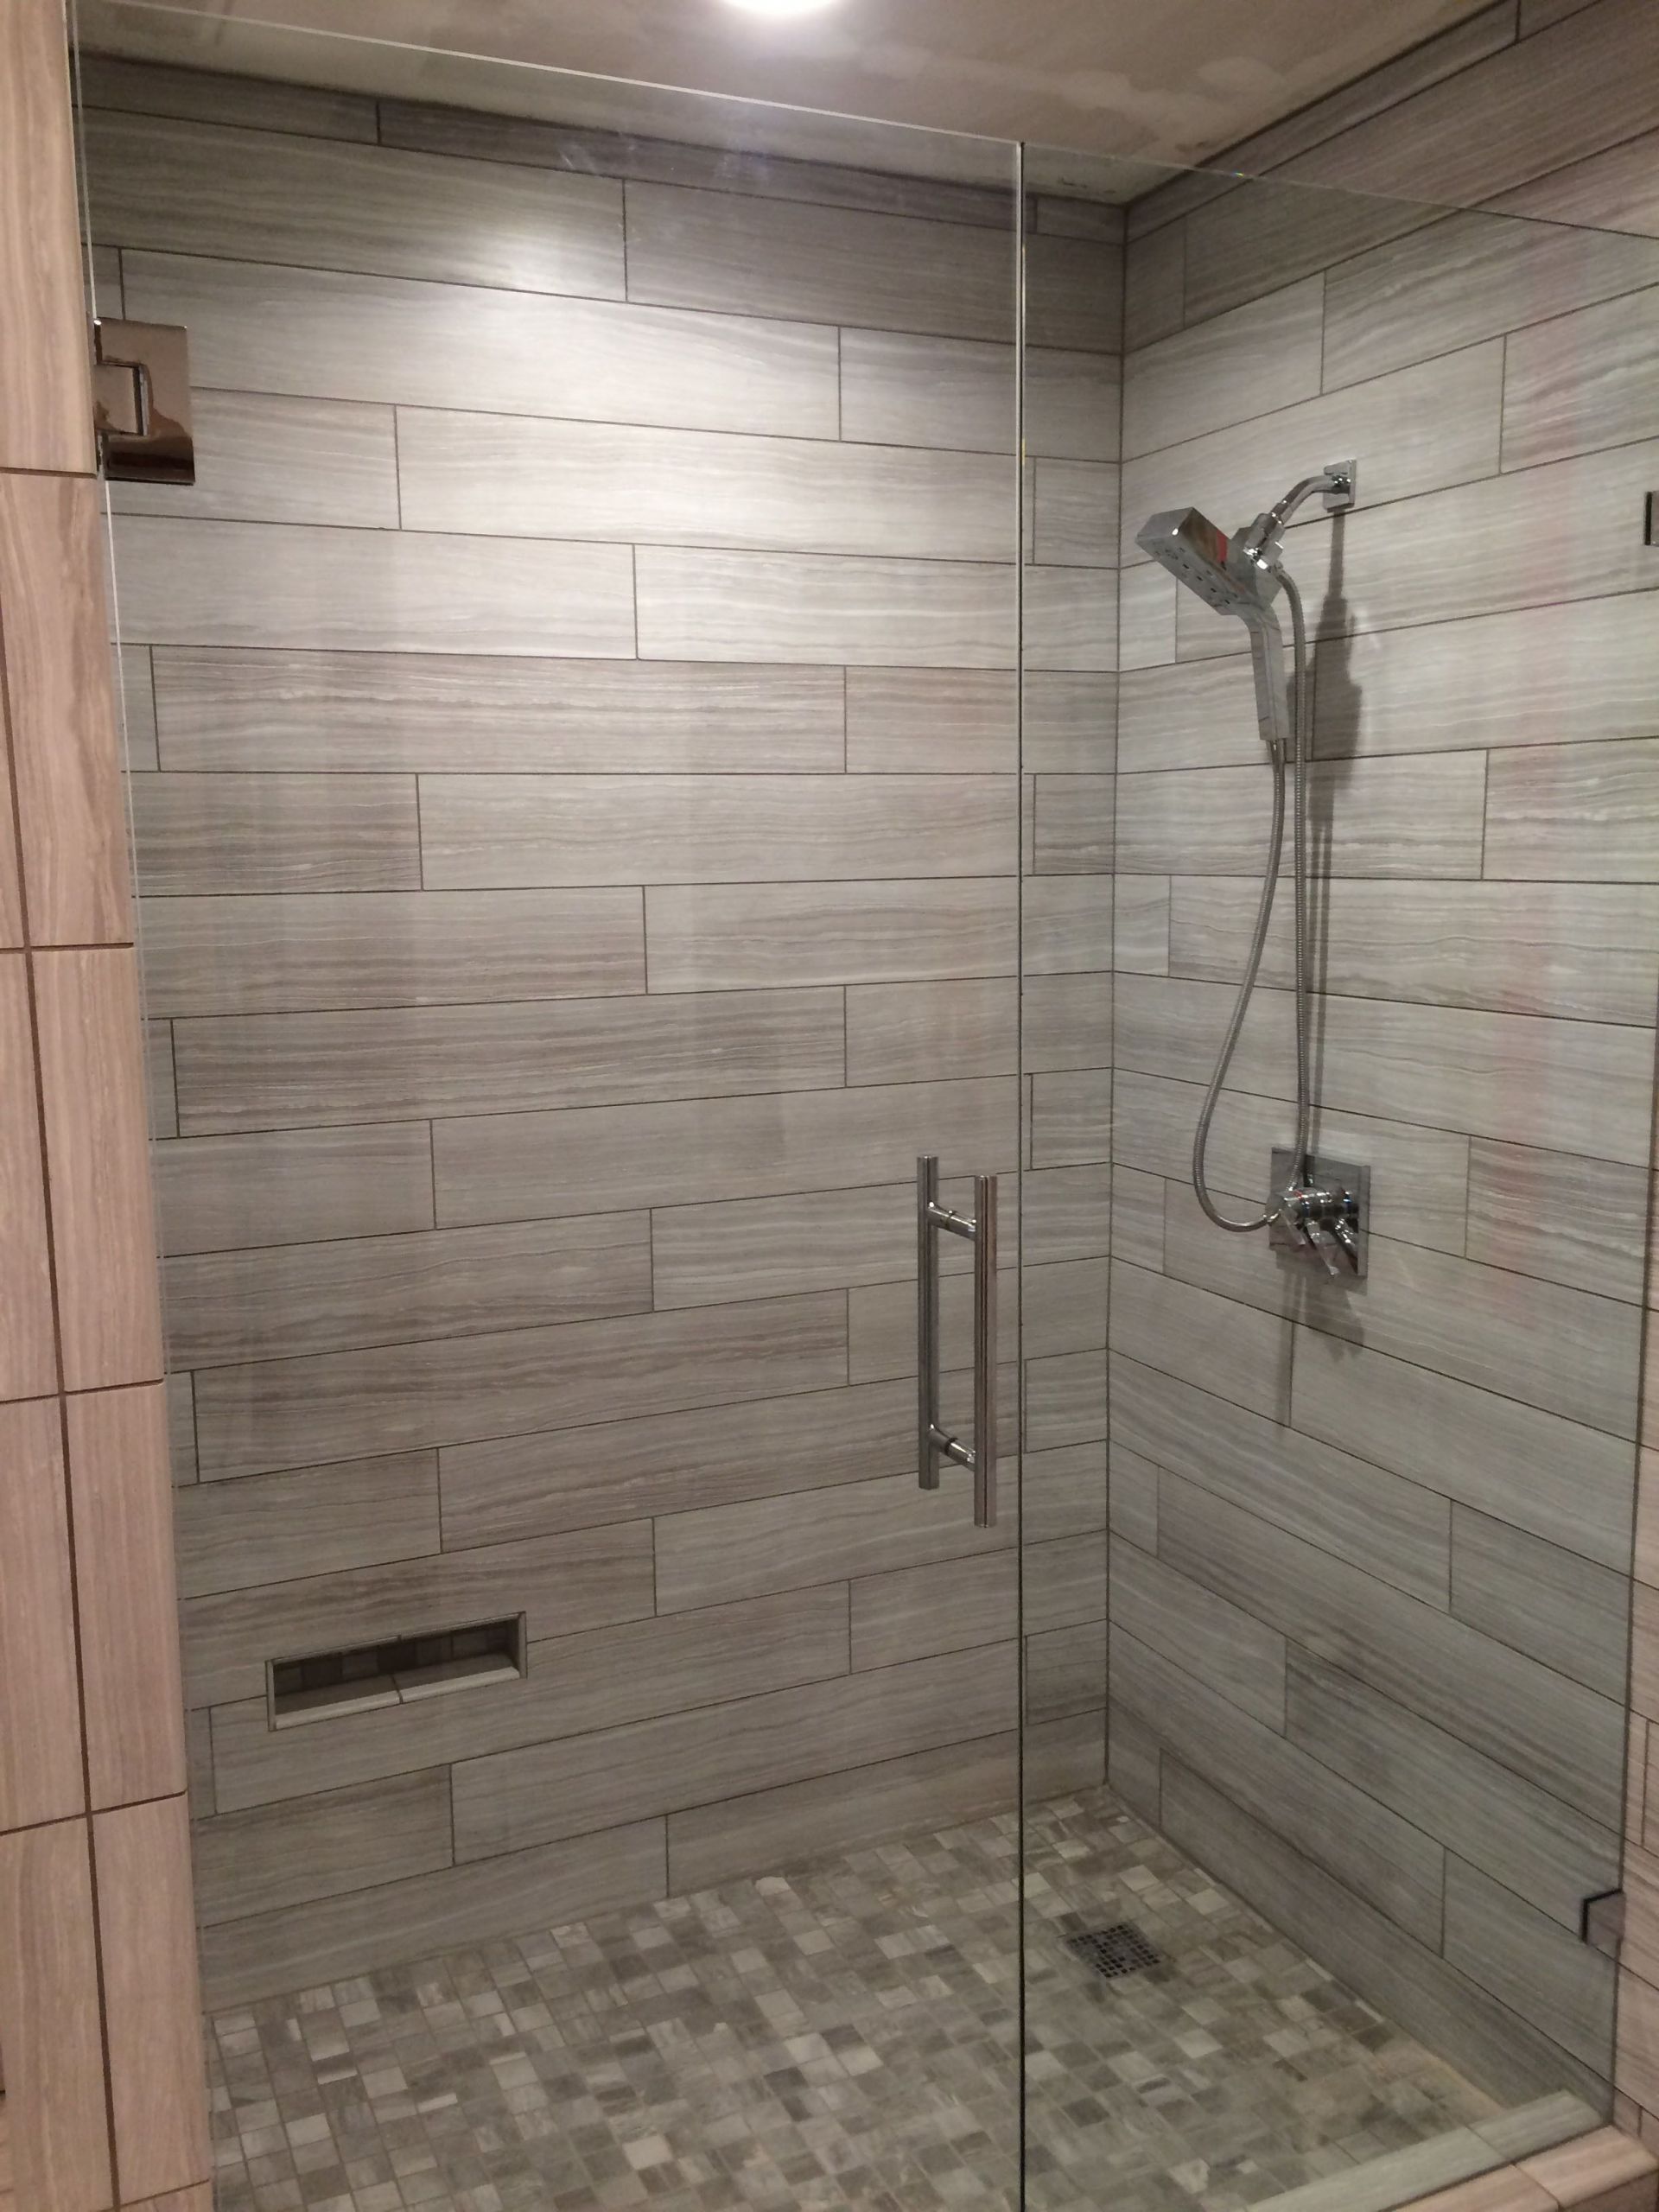 Ceramic Tile For Bathroom Showers
 Pin by Arizona Tile on Blissful Bathrooms